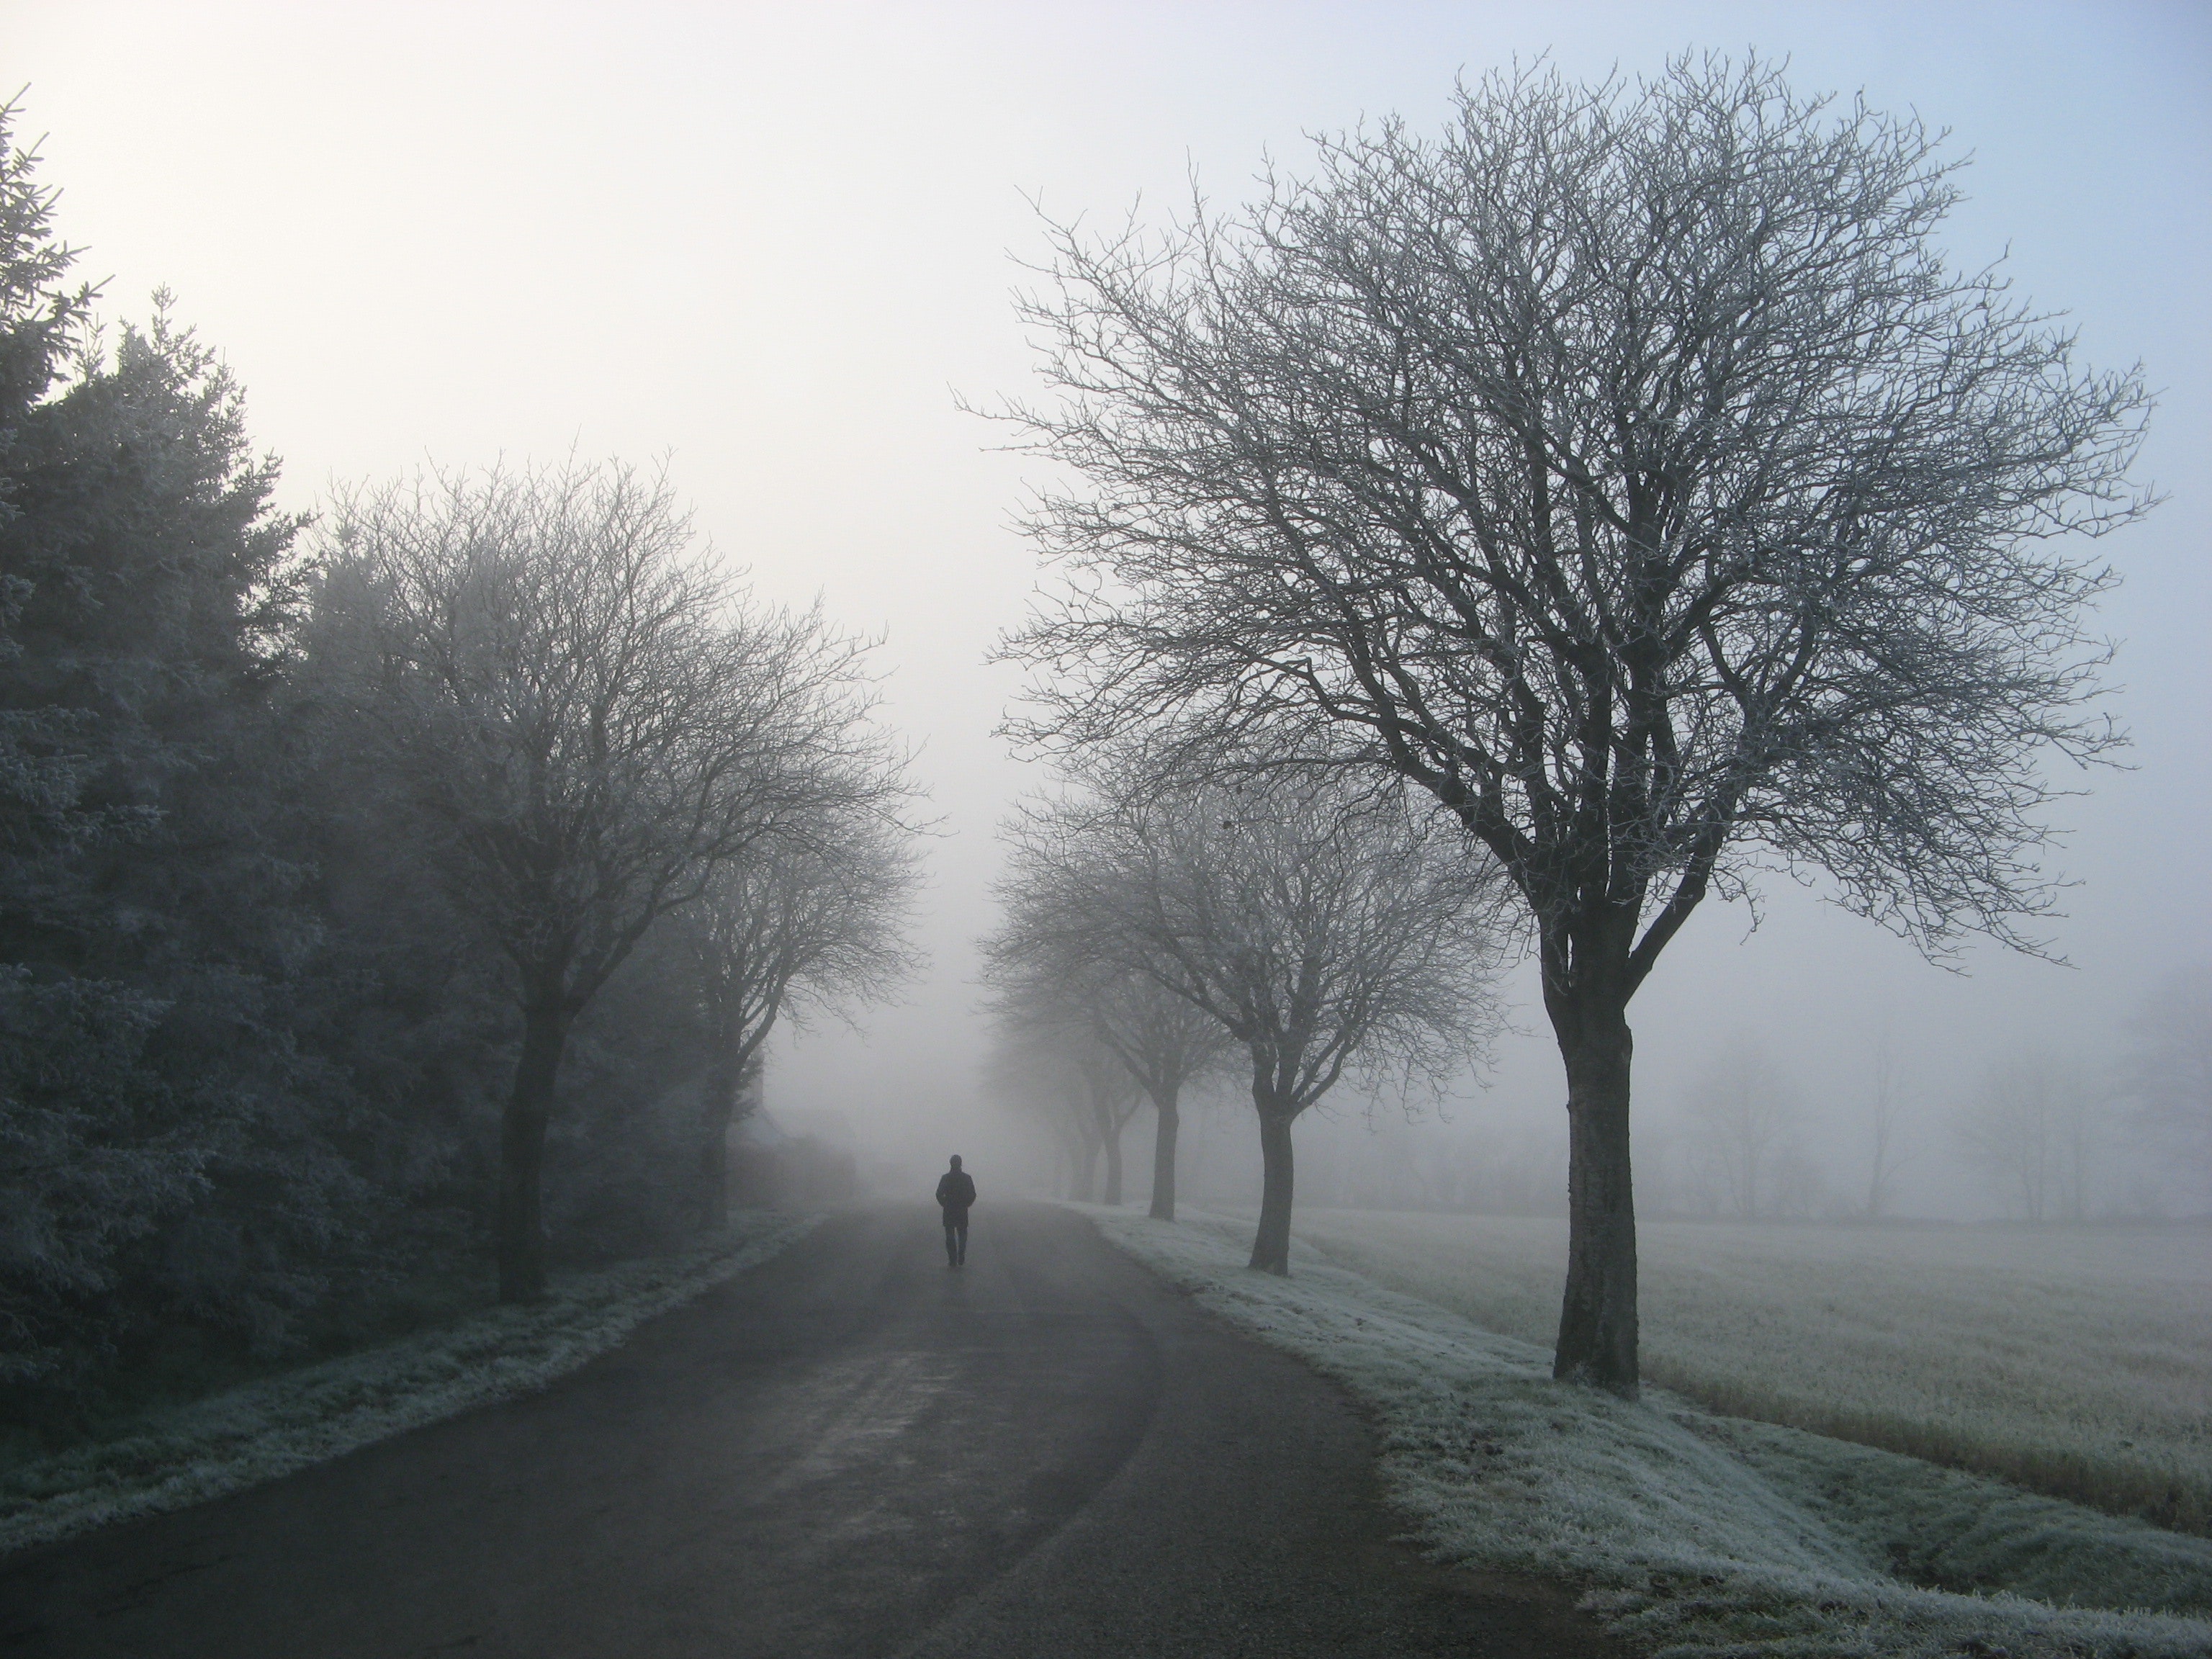 Person Walking on Road Between Trees, Alone, Peaceful, Winter, Weather, HQ Photo